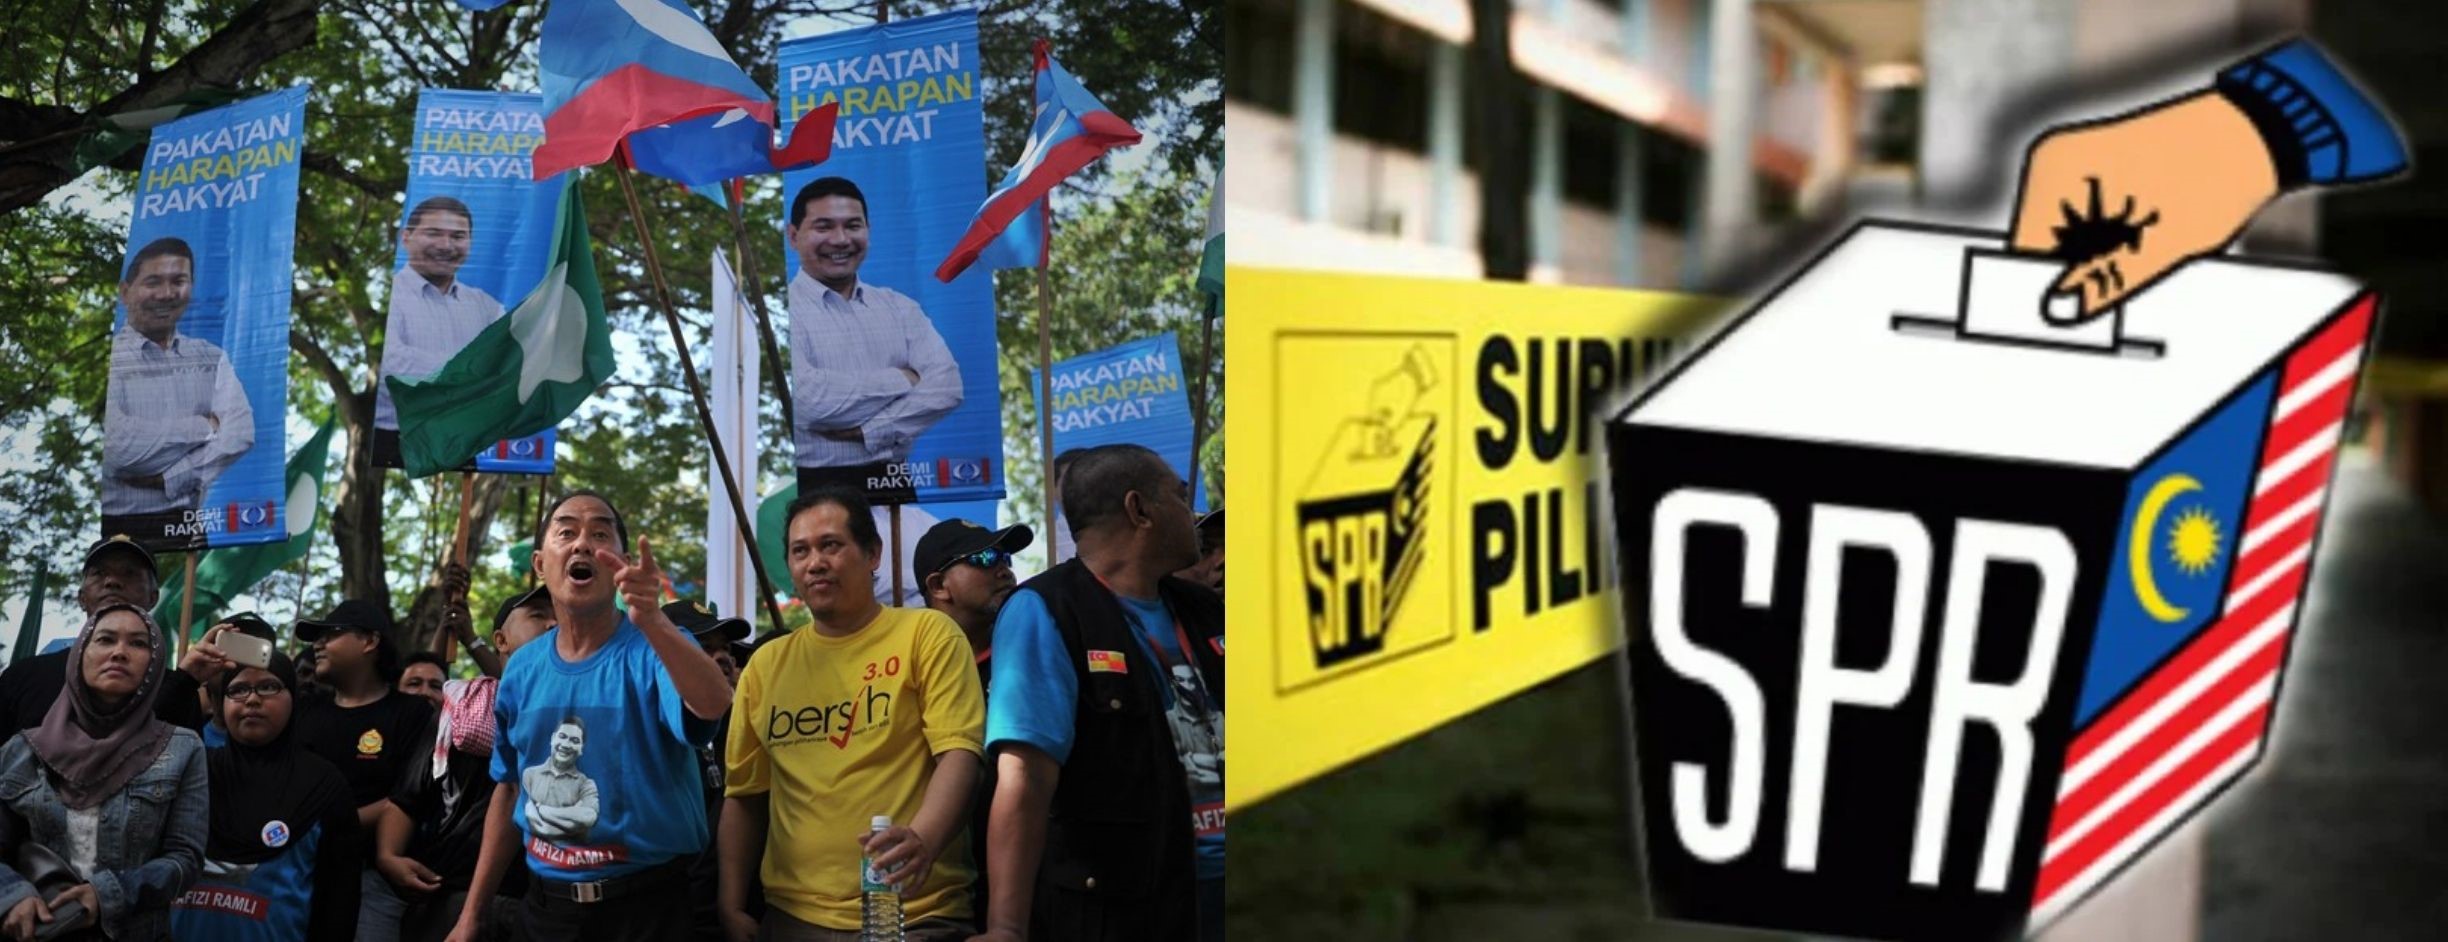 We wouldn’t want a deja vu of the Sabah elections now do we?